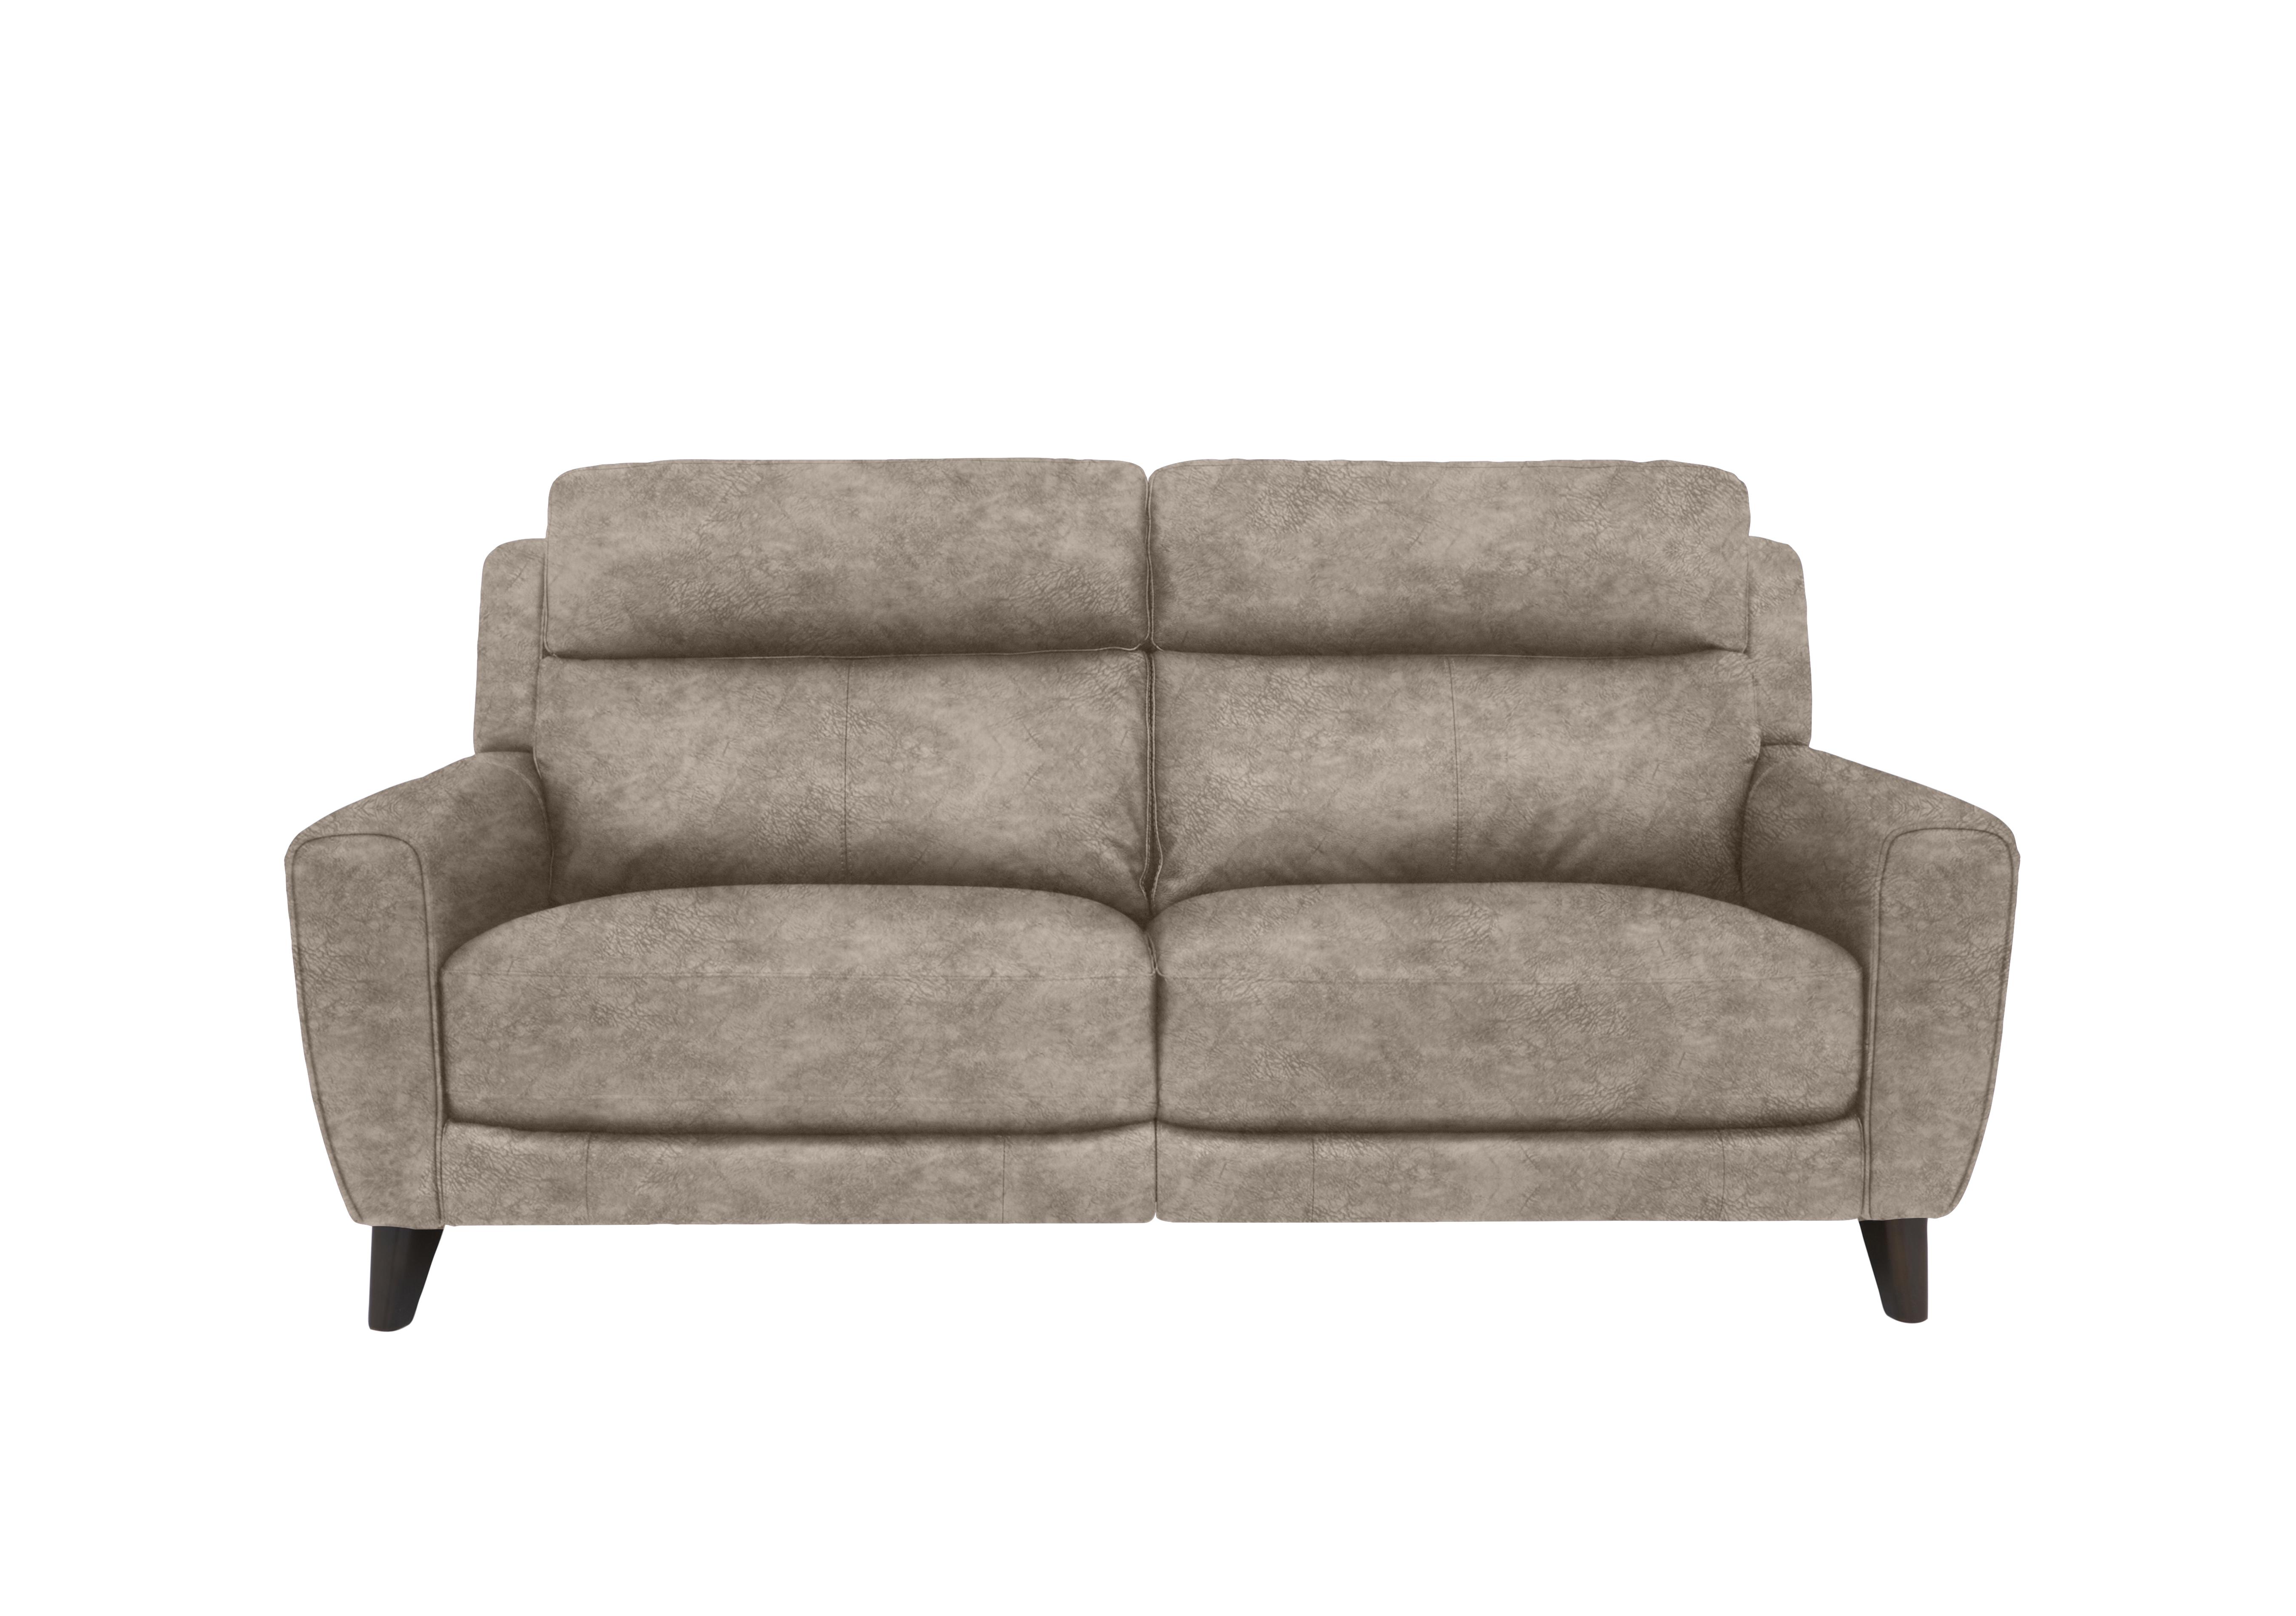 Zen 3 Seater Fabric Power Recliner Sofa with Power Headrests and Power Lumbar in Bfa-Bnn-R29 Mink on Furniture Village